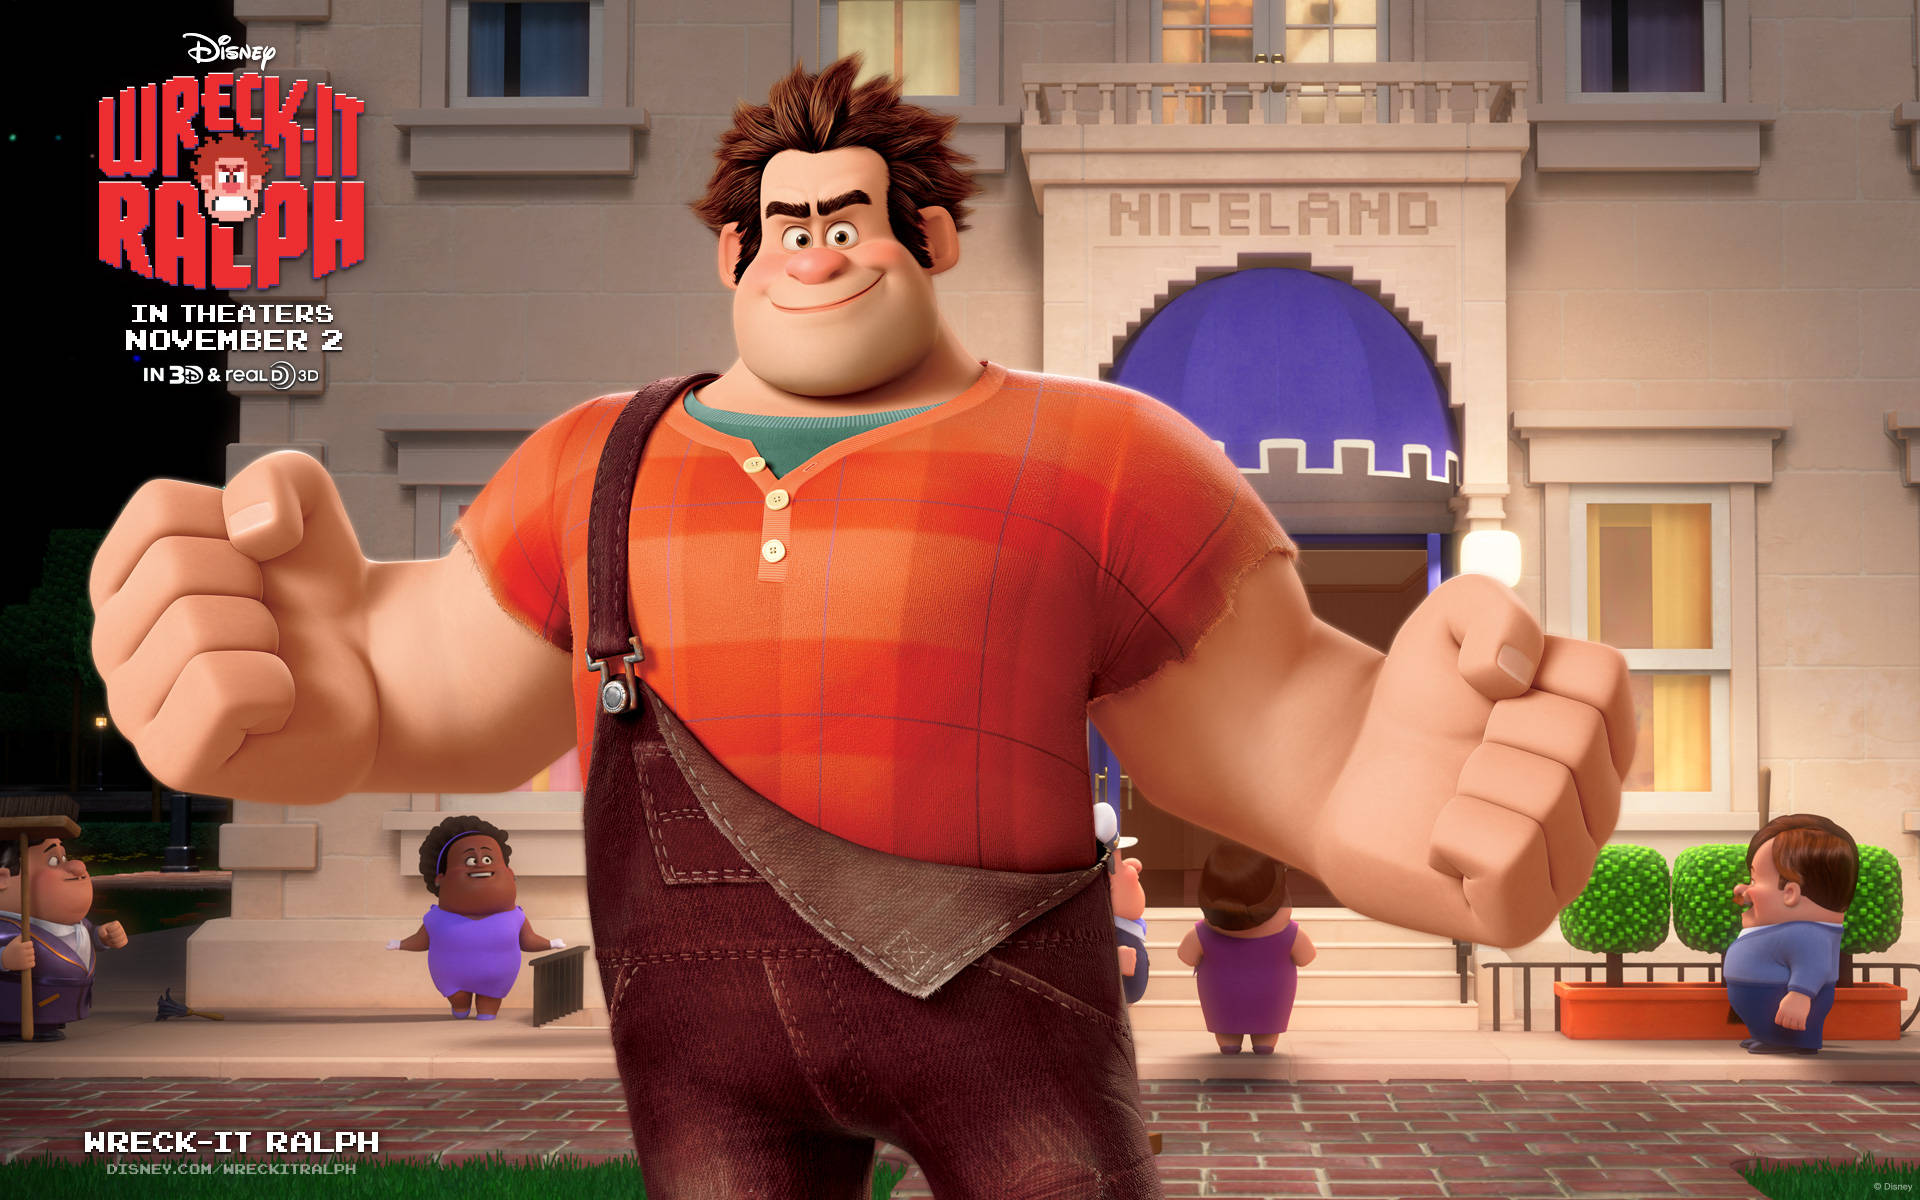 Wreck-it Ralph Character Poster Background